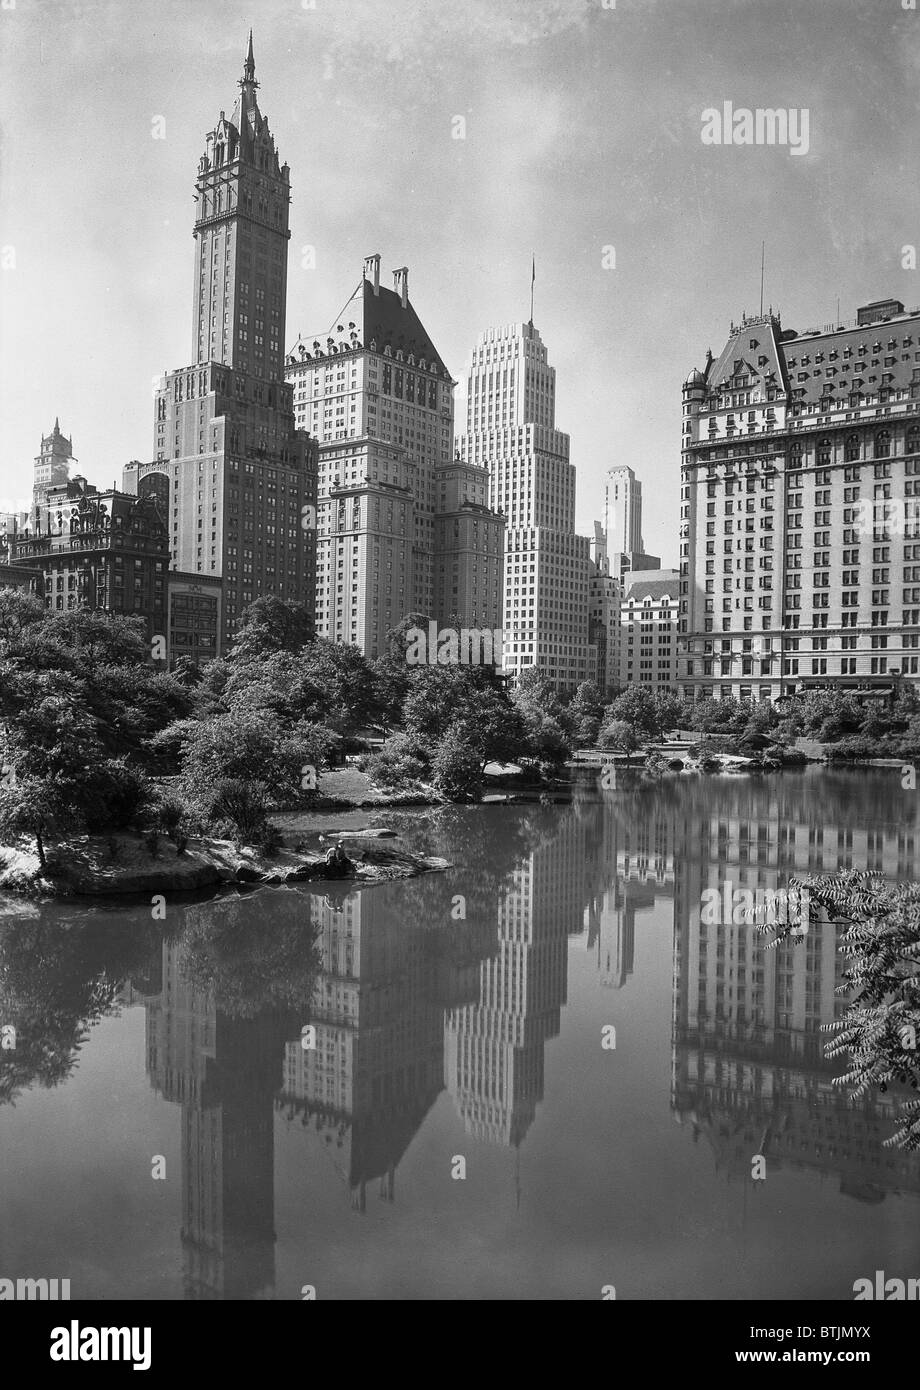 New York City, view of plaza buildings over park lake, photograph by Samuel H. Gottscho, January 23, 1933. Stock Photo